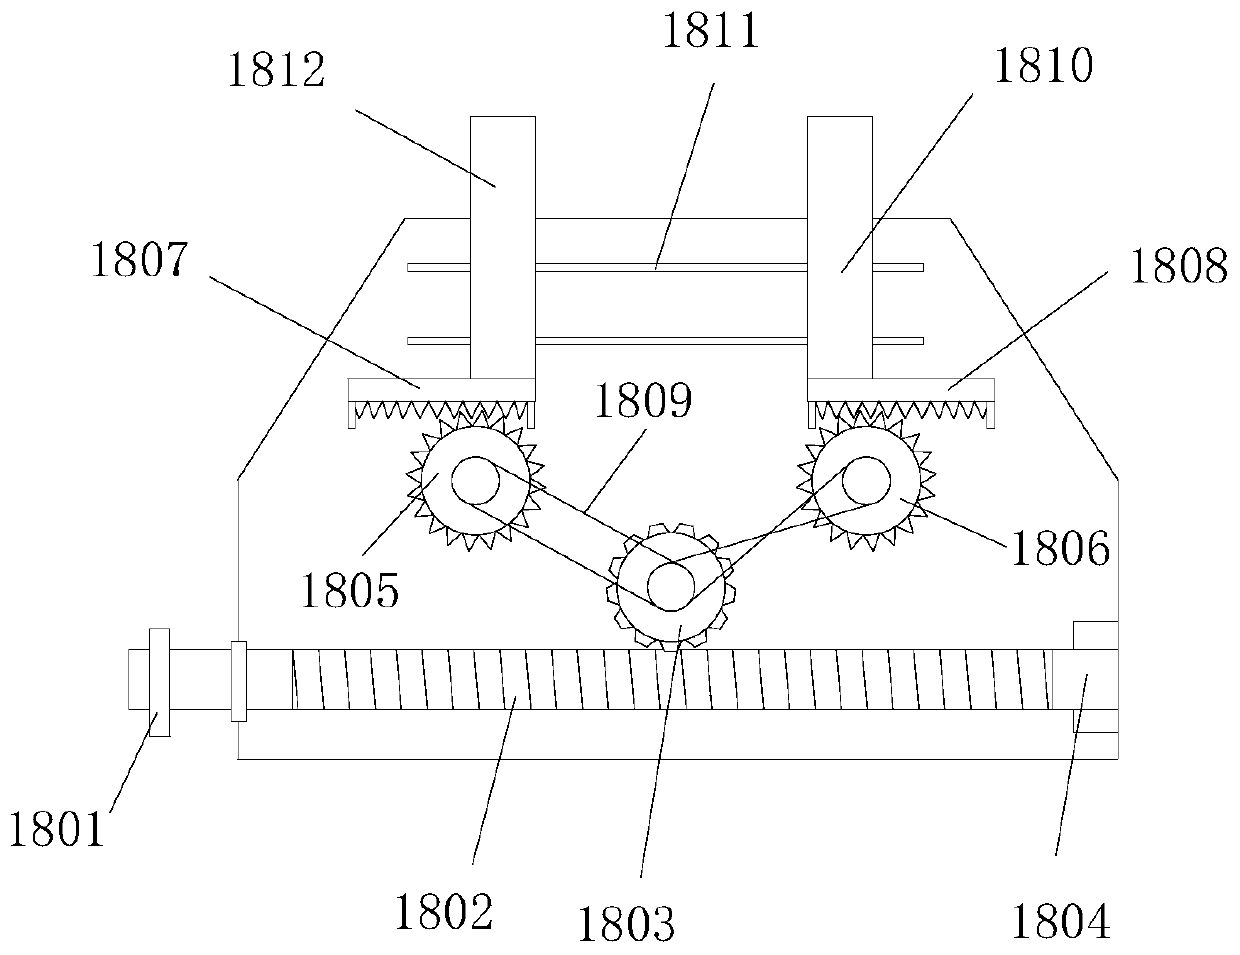 Orthopedic auxiliary traction device